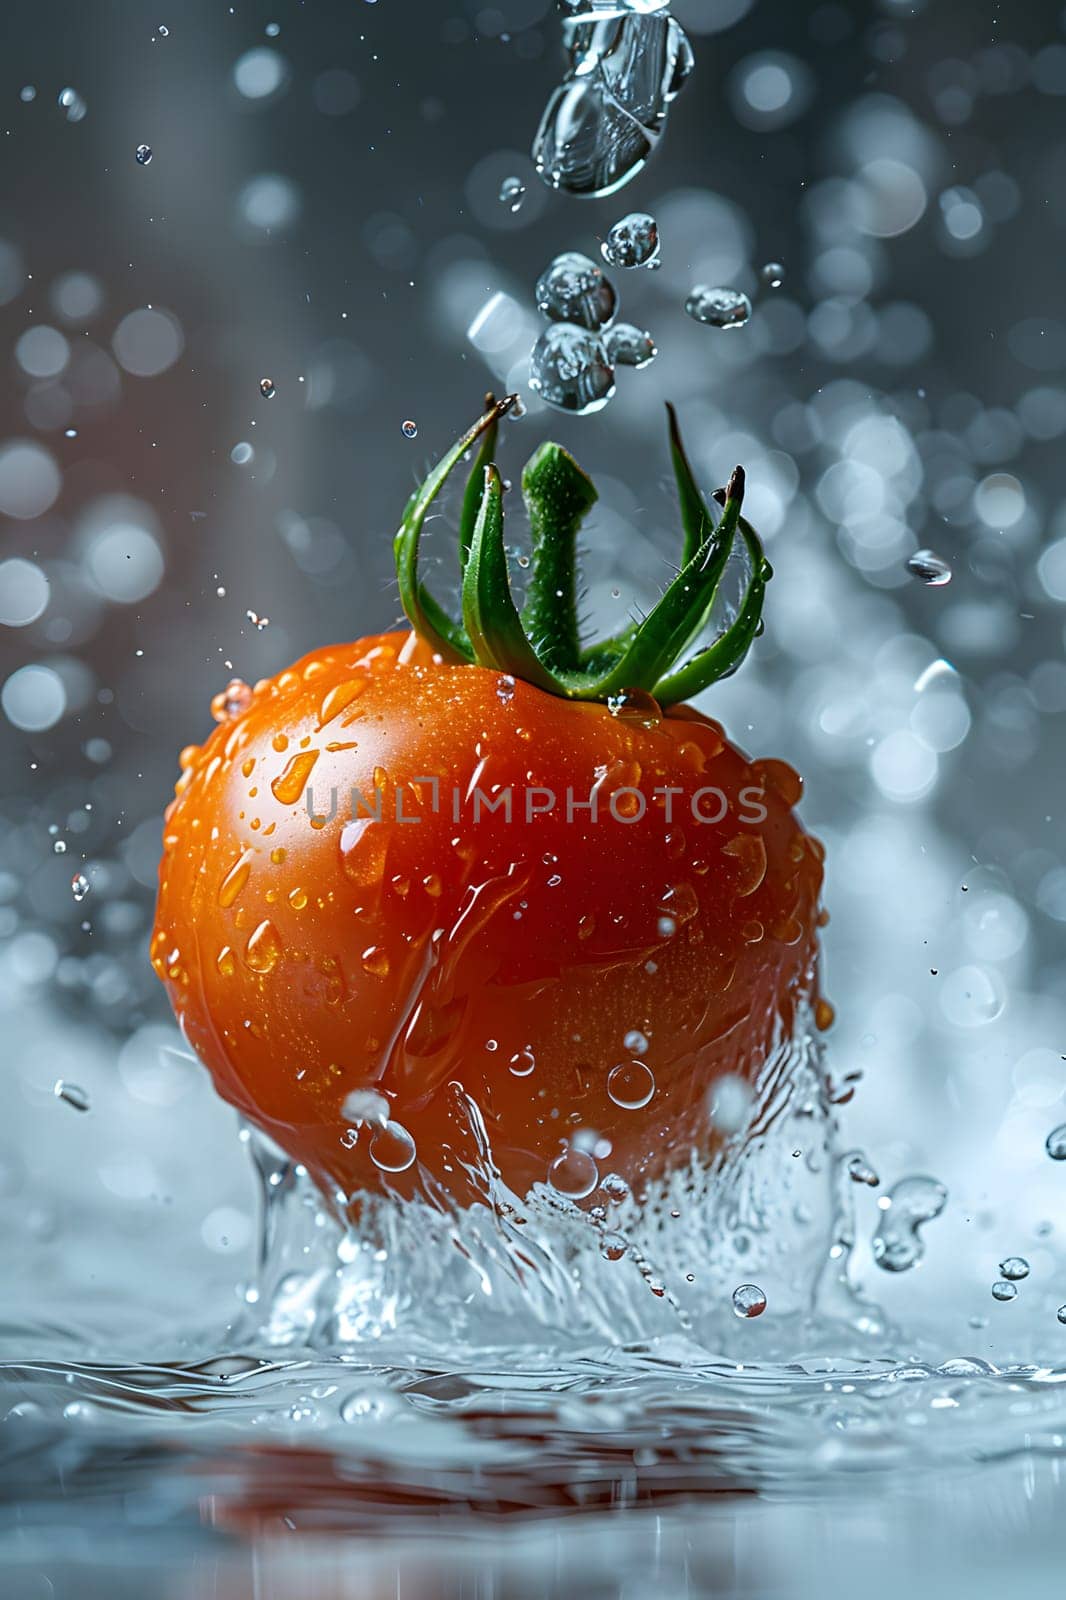 A Tomato, a seedless fruit, is dropping into the liquid by Nadtochiy